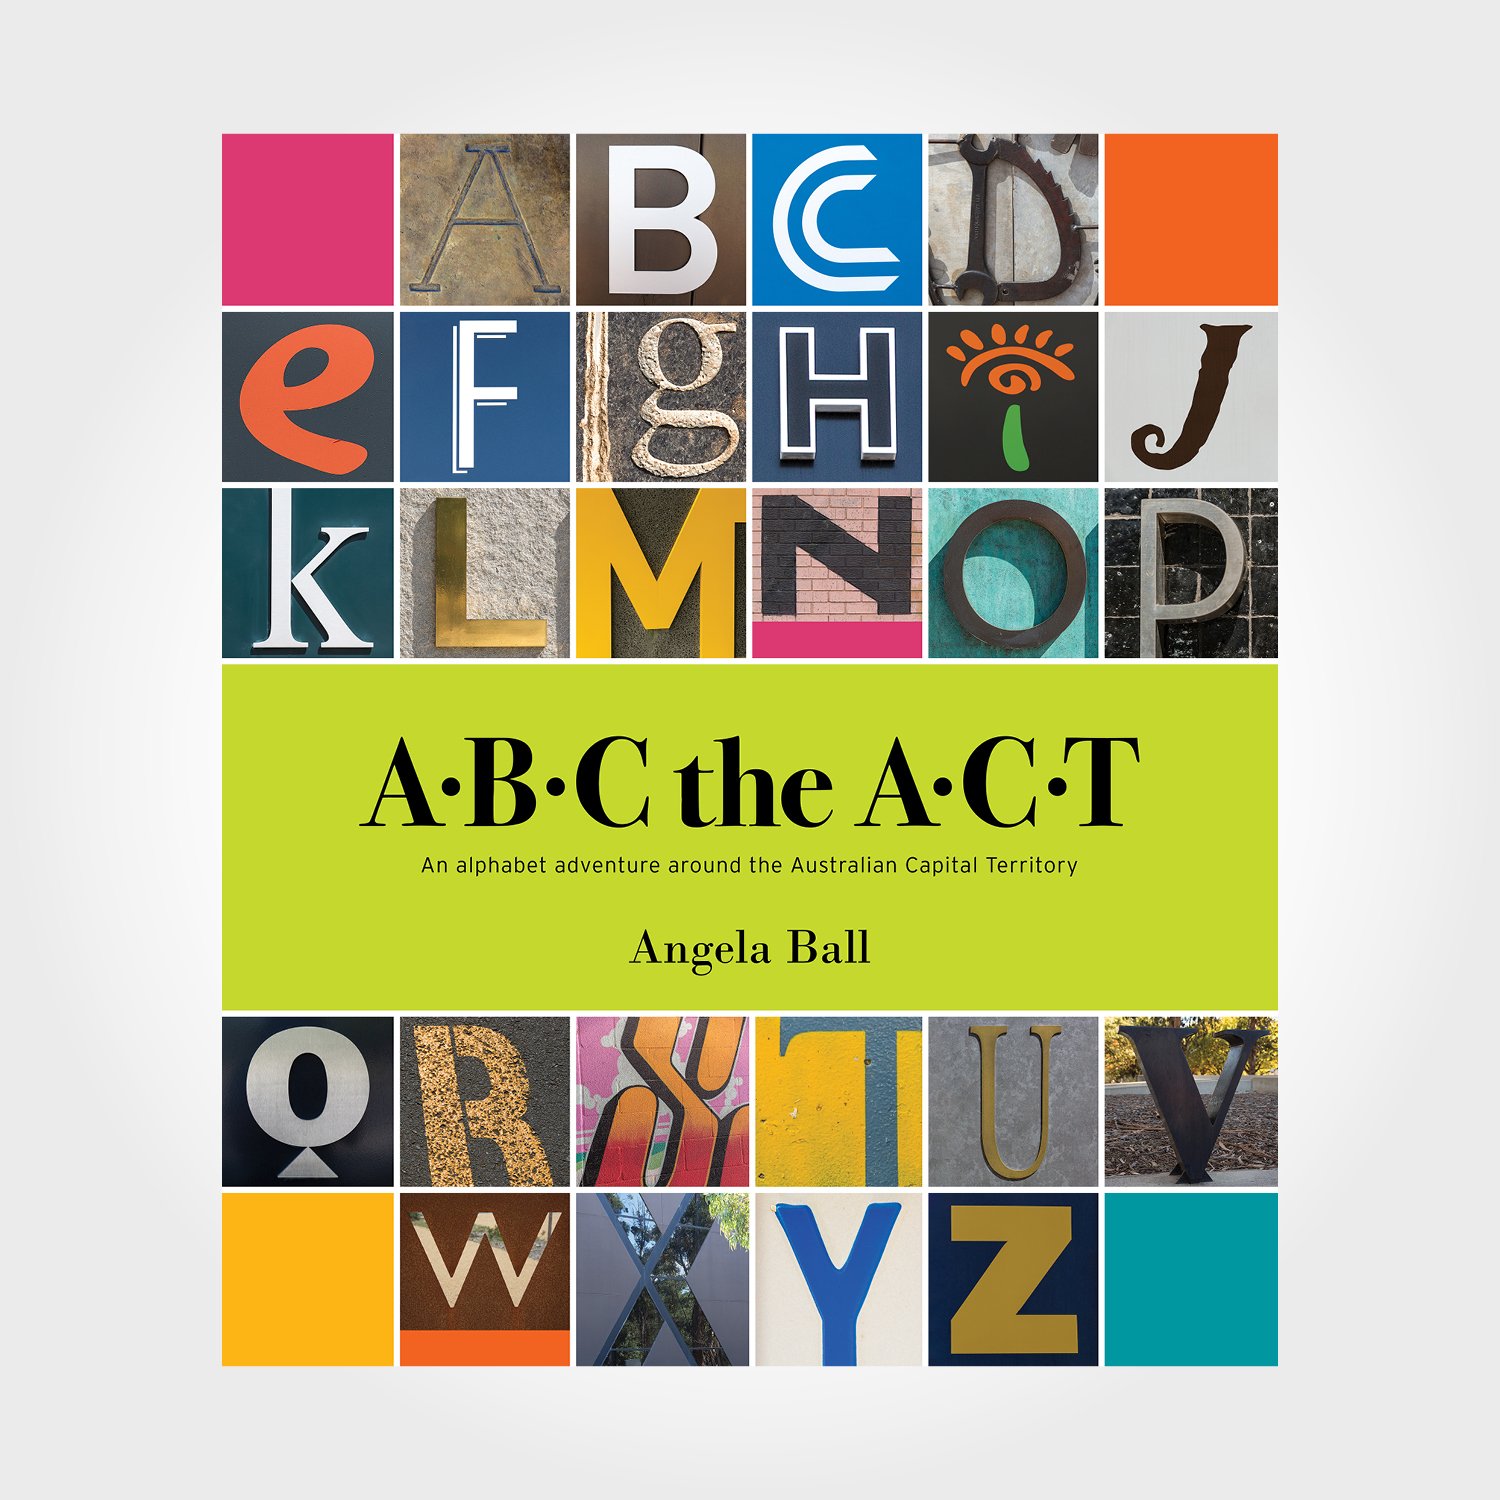 ABC the ACT